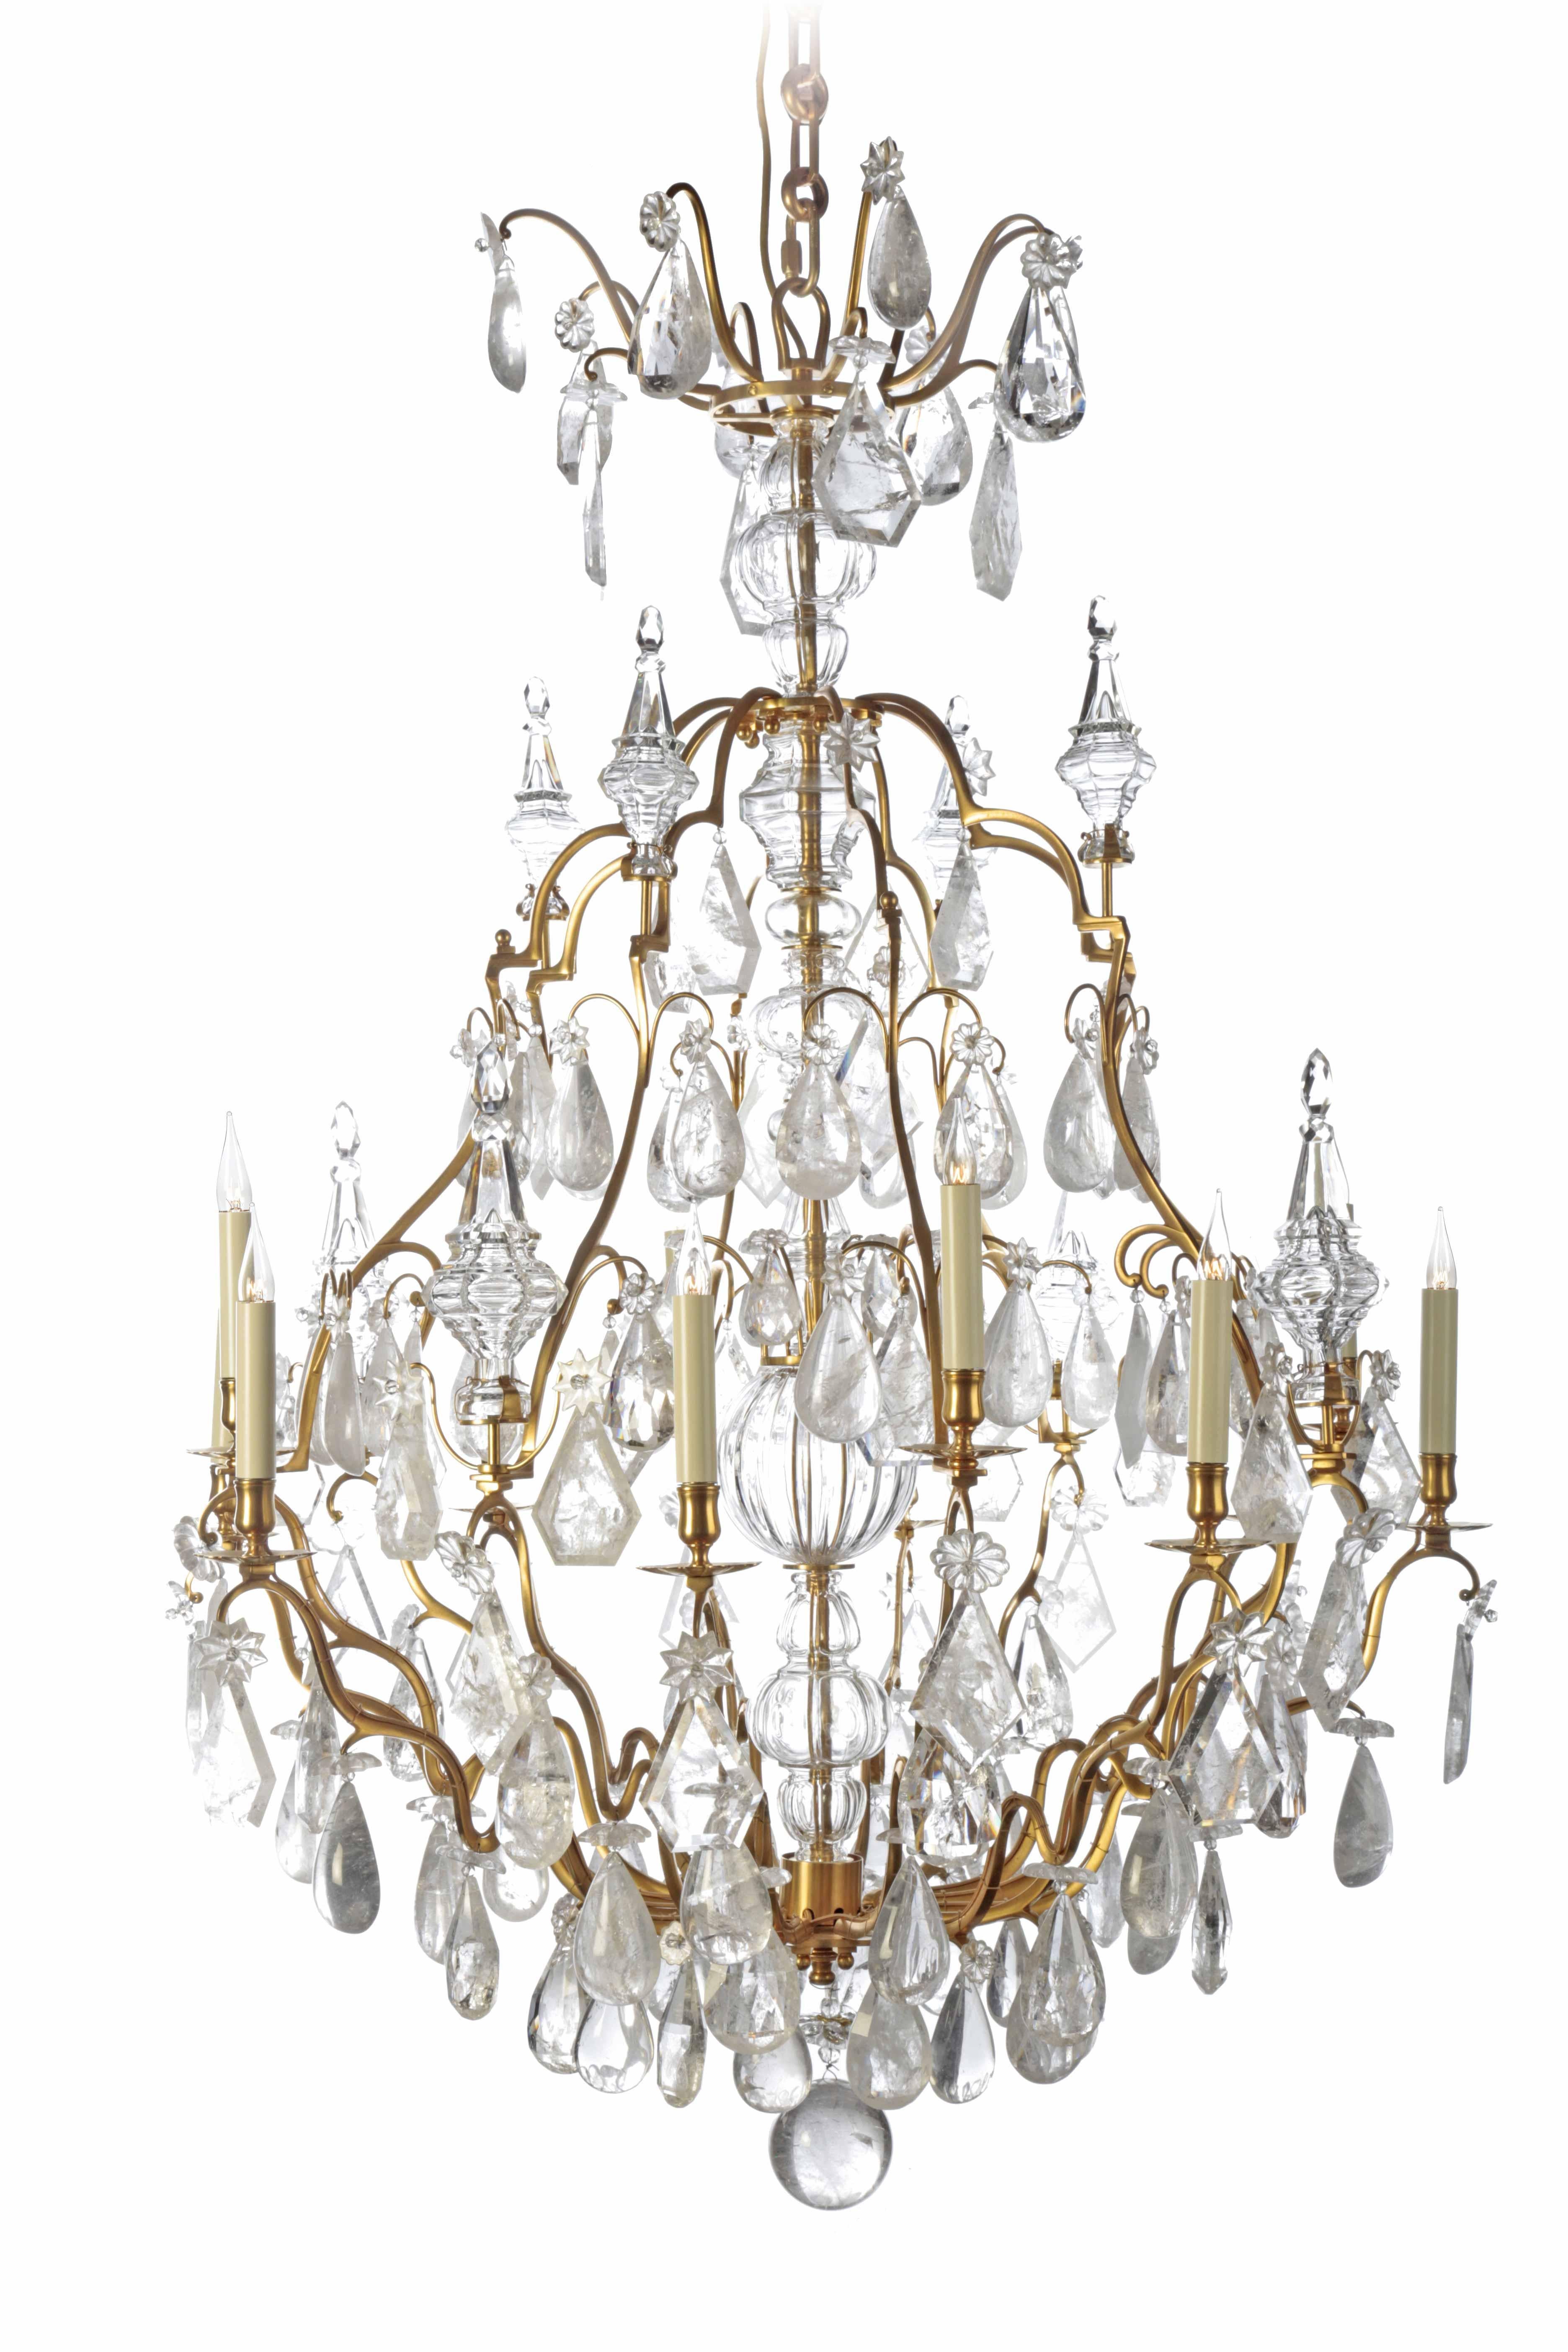 LU-BR-12129-12 Maison Baguès chandelier, 12lights.
Various finish possible: polished brass, satin brass, polished nickel, satin nickel, dark patina, black patina, oil rubbed bronze, gold, 24k nitrate gold (shown on picture here)
Bronze and